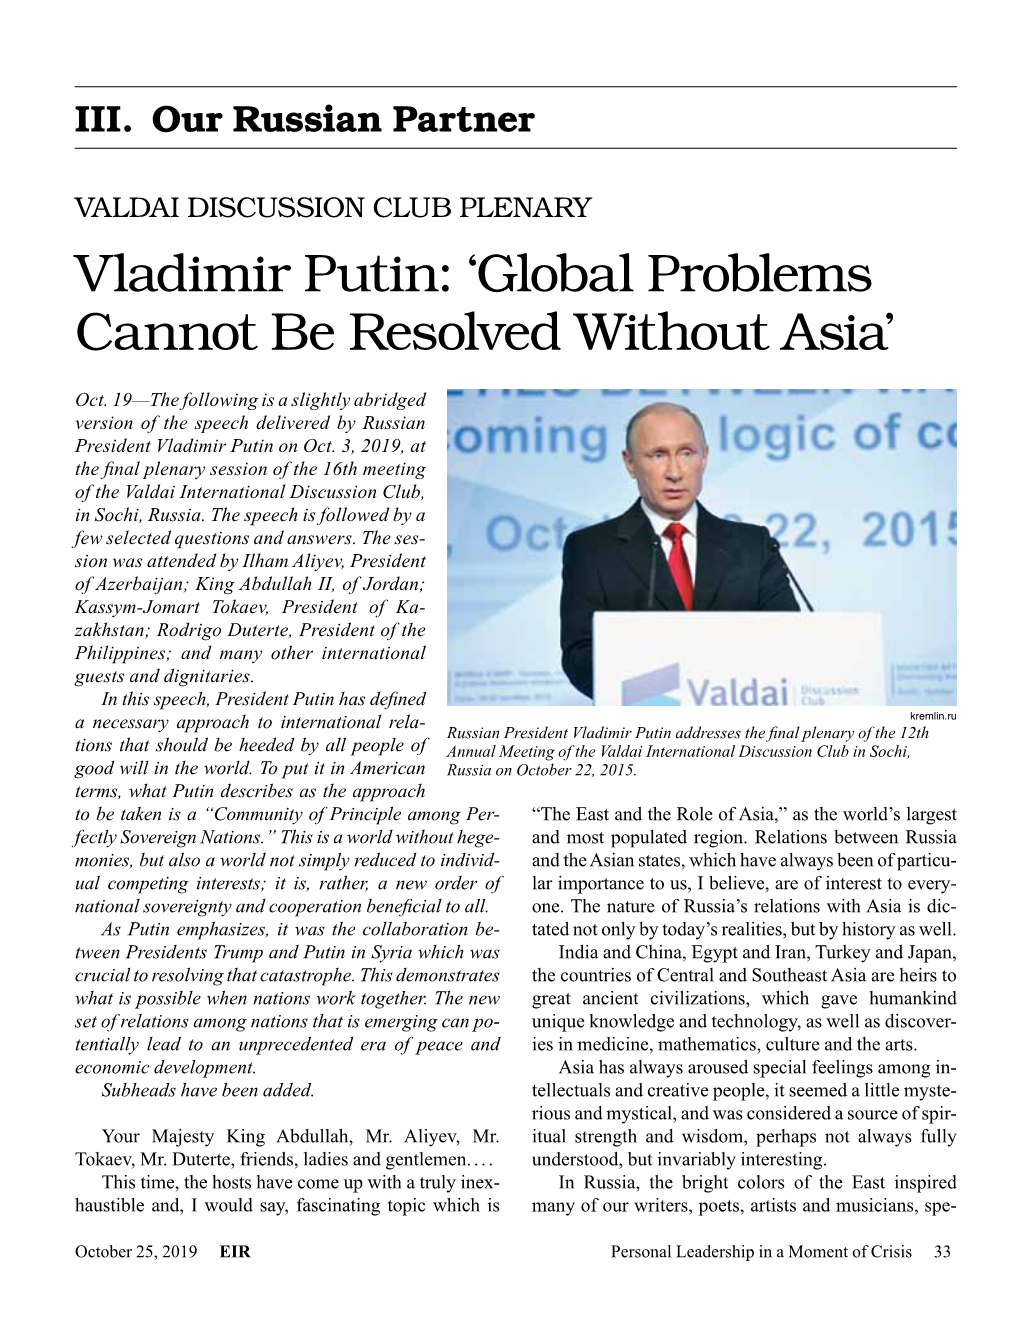 Vladimir Putin: 'Global Problems Cannot Be Resolved Without Asia'